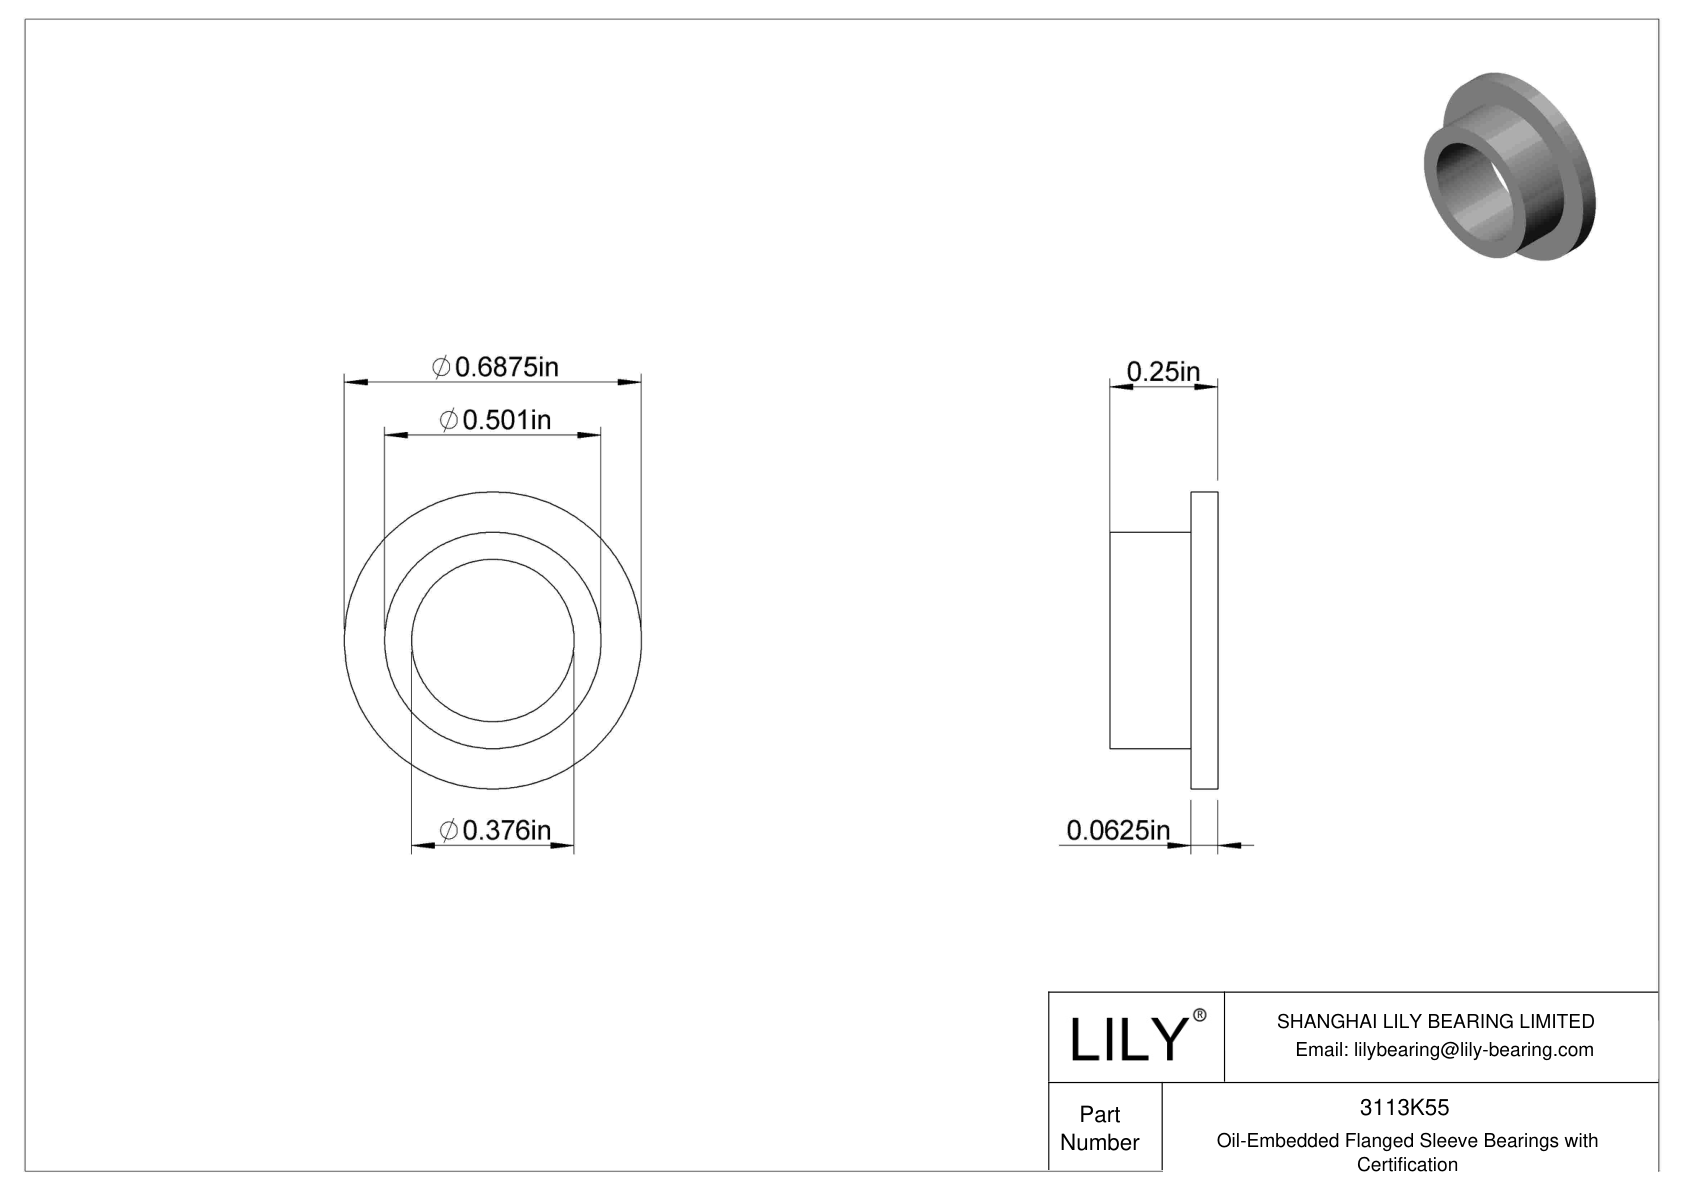 DBBDKFF Oil-Embedded Flanged Sleeve Bearings with Certification cad drawing